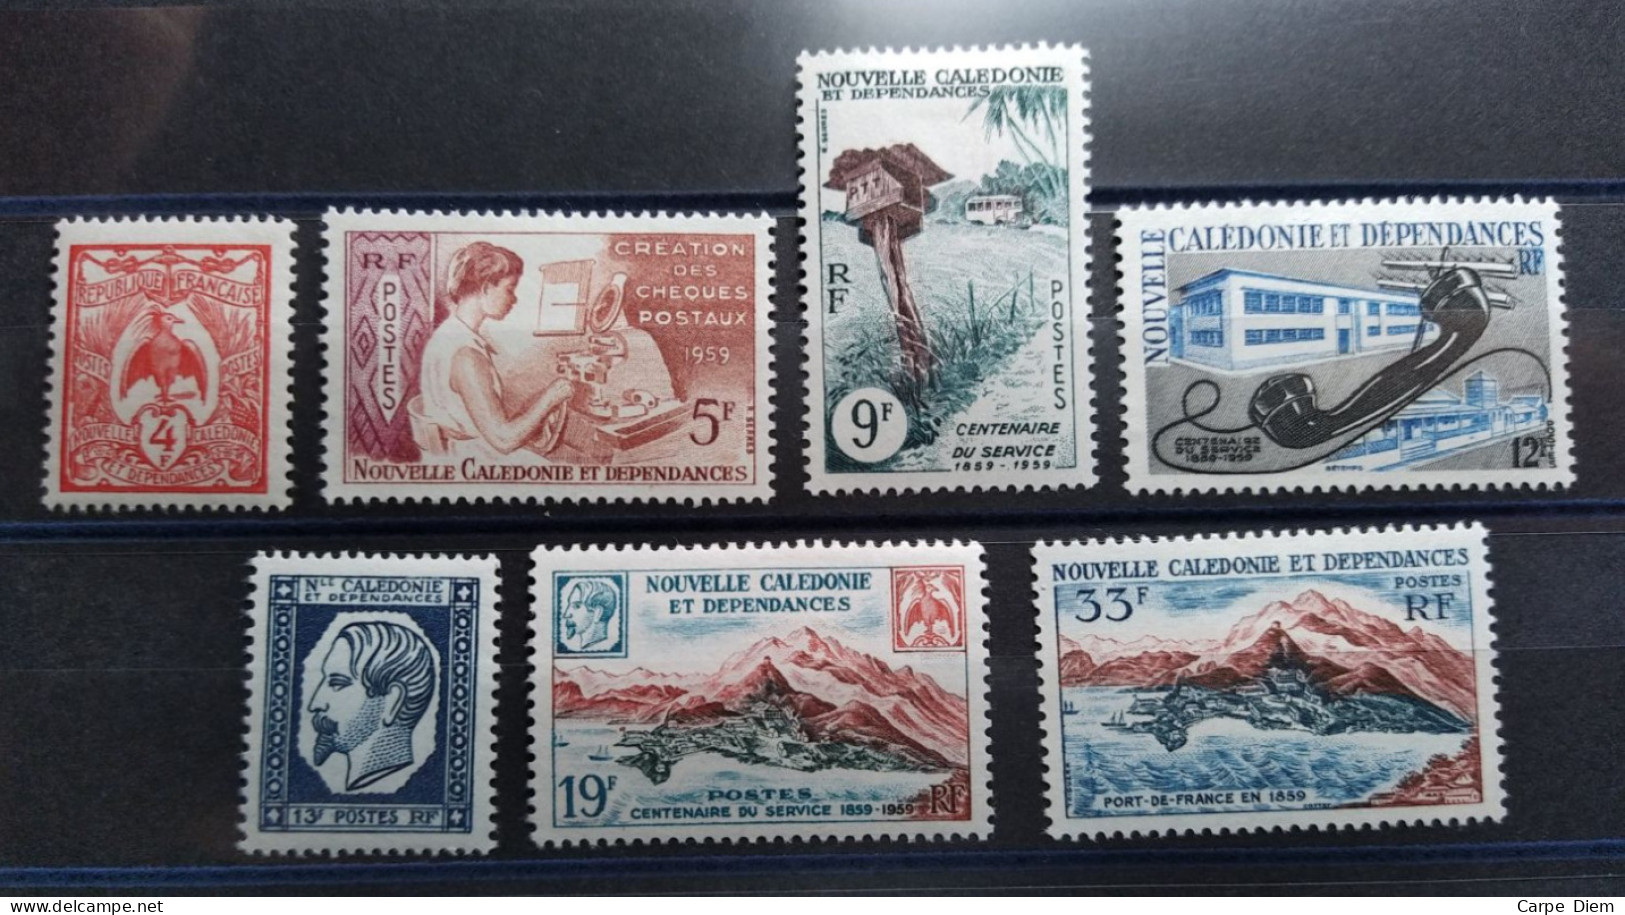 NOUVELLE CALEDONIE - 1960 - N°Yv. 295 à 301 - Série Complète - Neuf ** - Unused Stamps